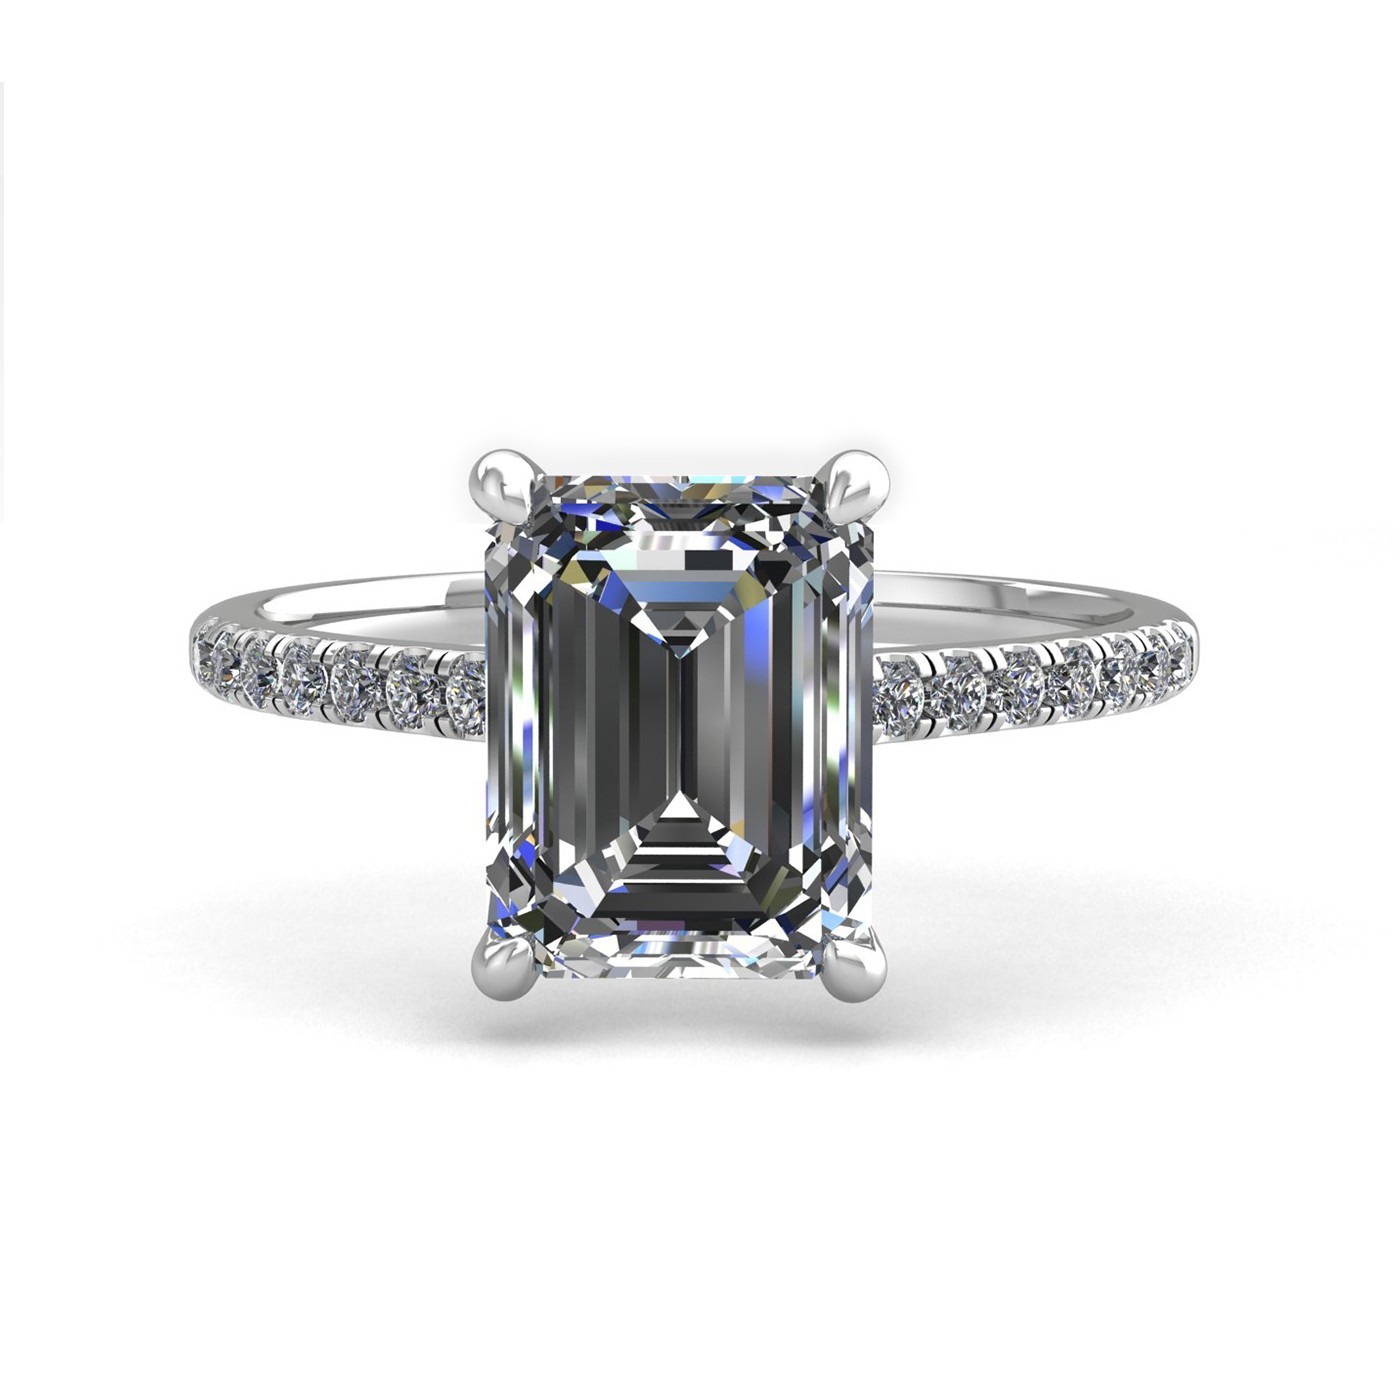 18k white gold 1.0ct 4 prongs emerald cut diamond engagement ring with whisper thin pavÉ set band Photos & images